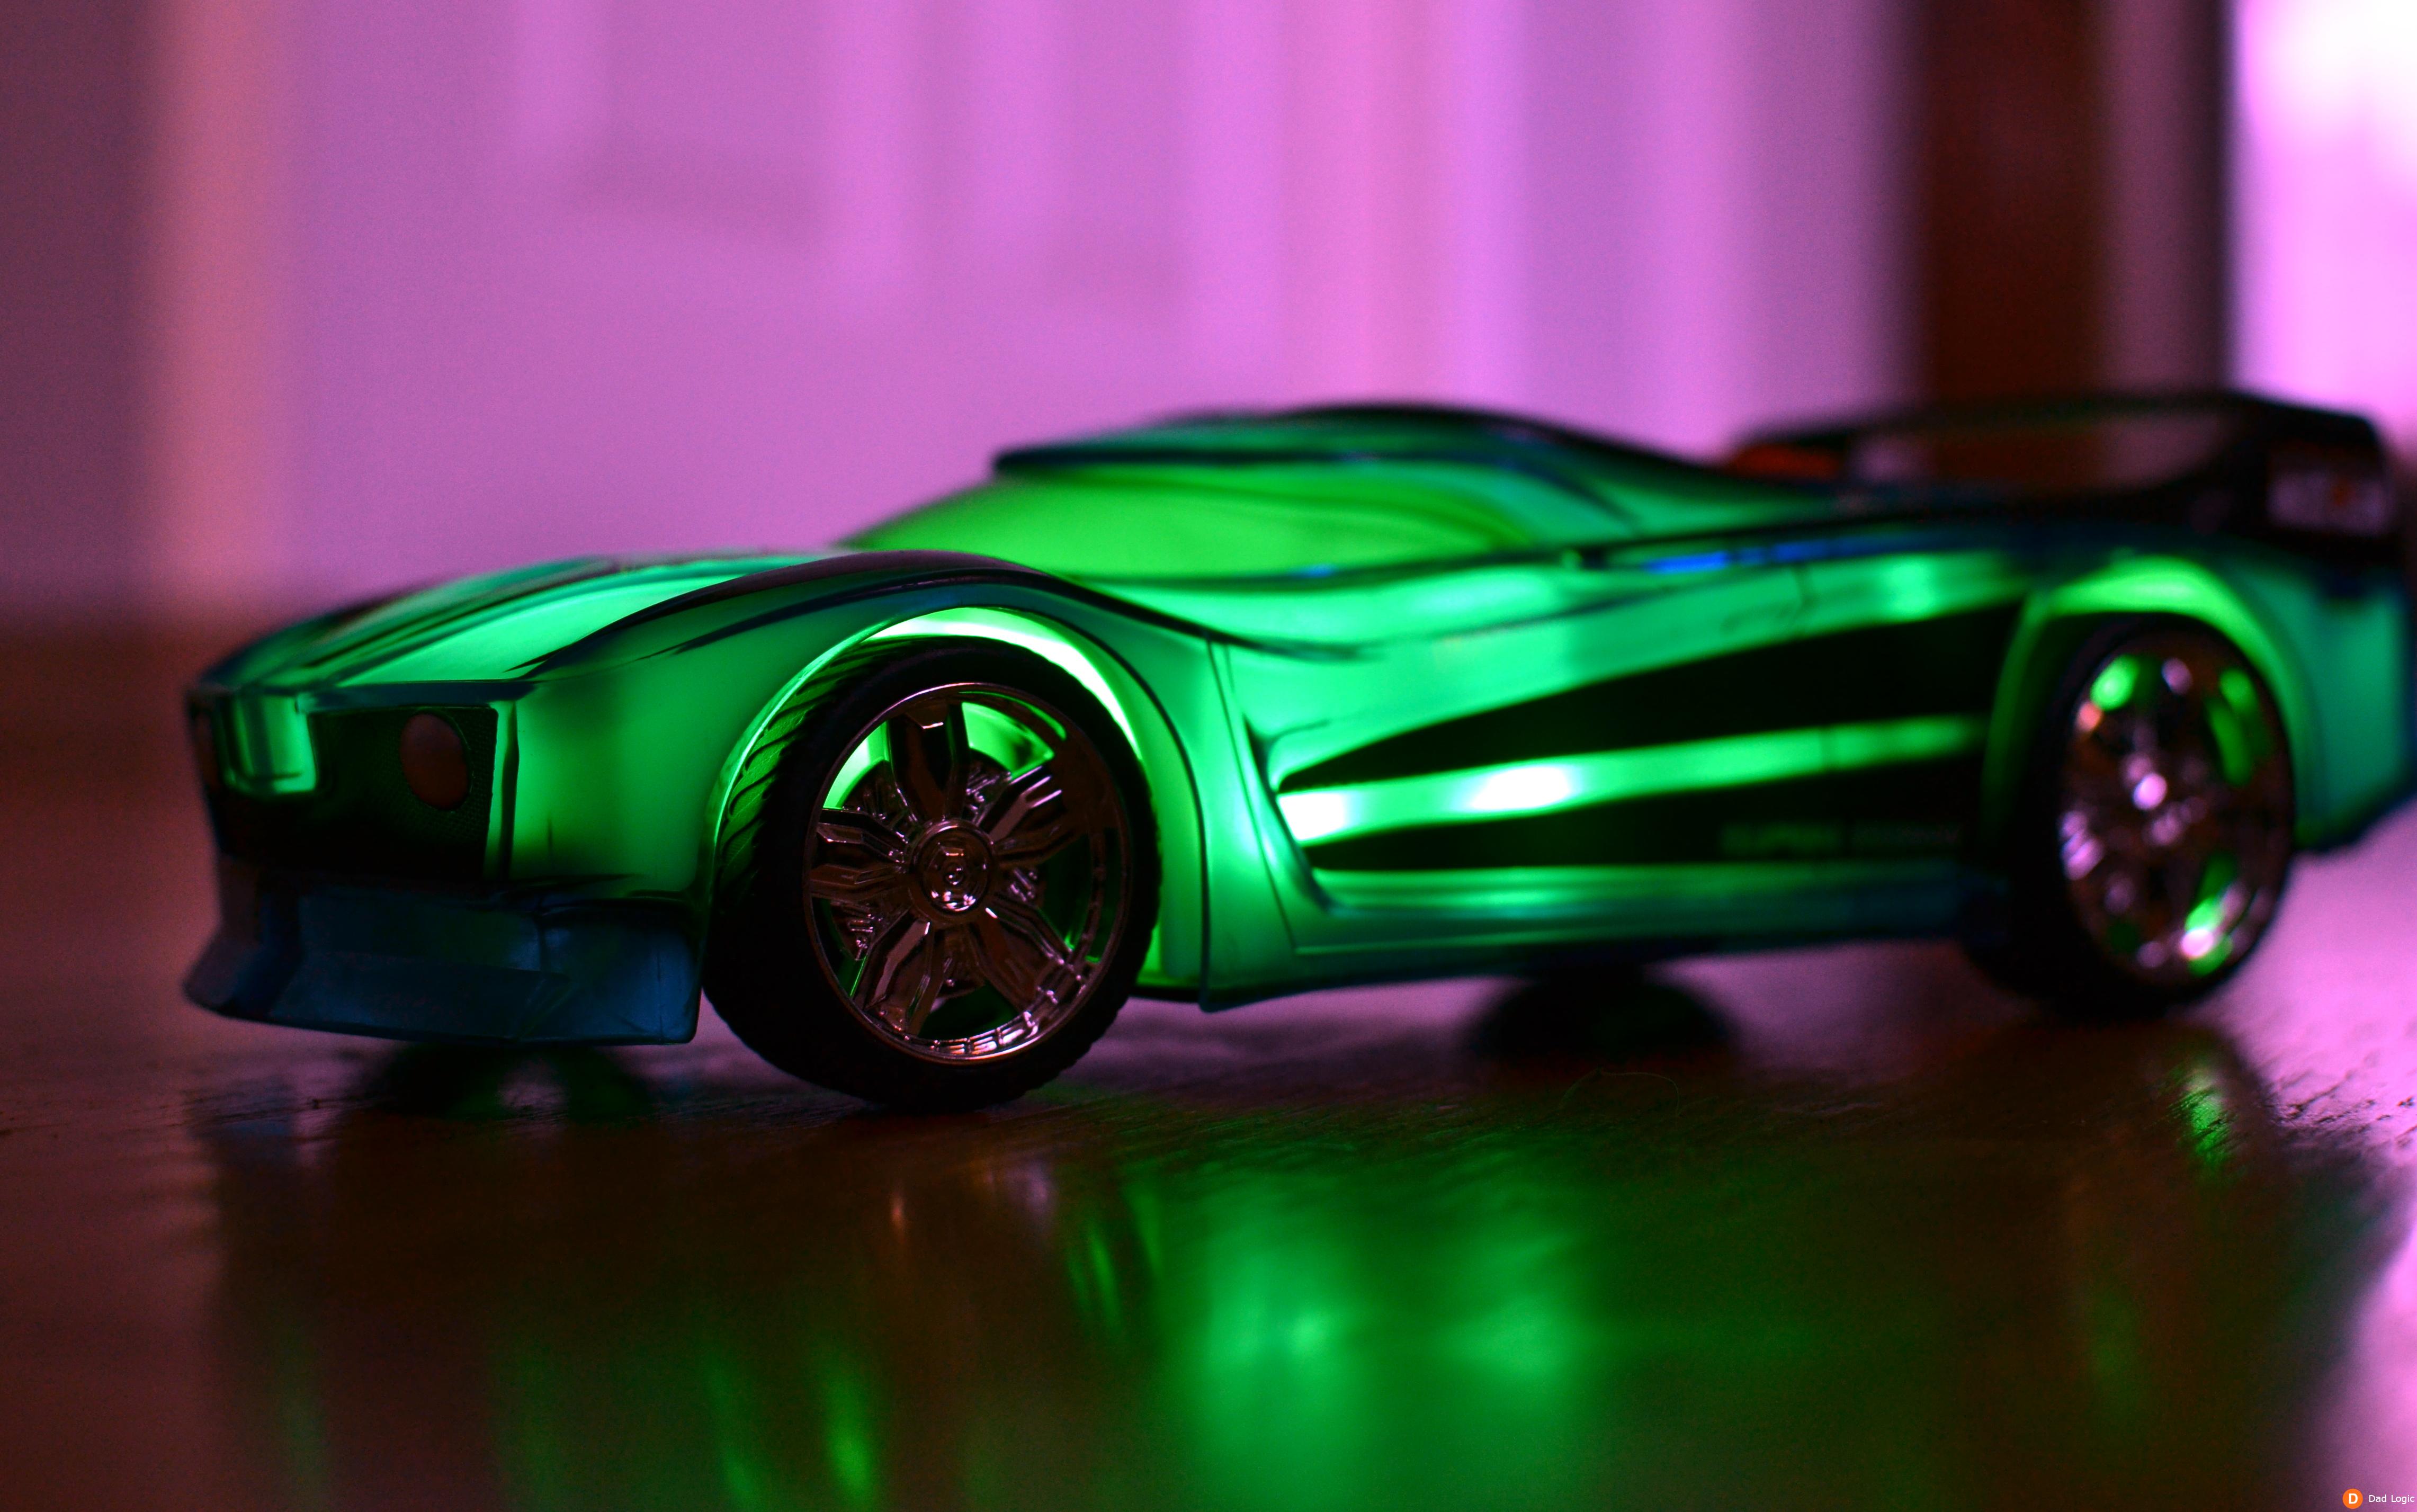 hot wheels light and sound hyper racers